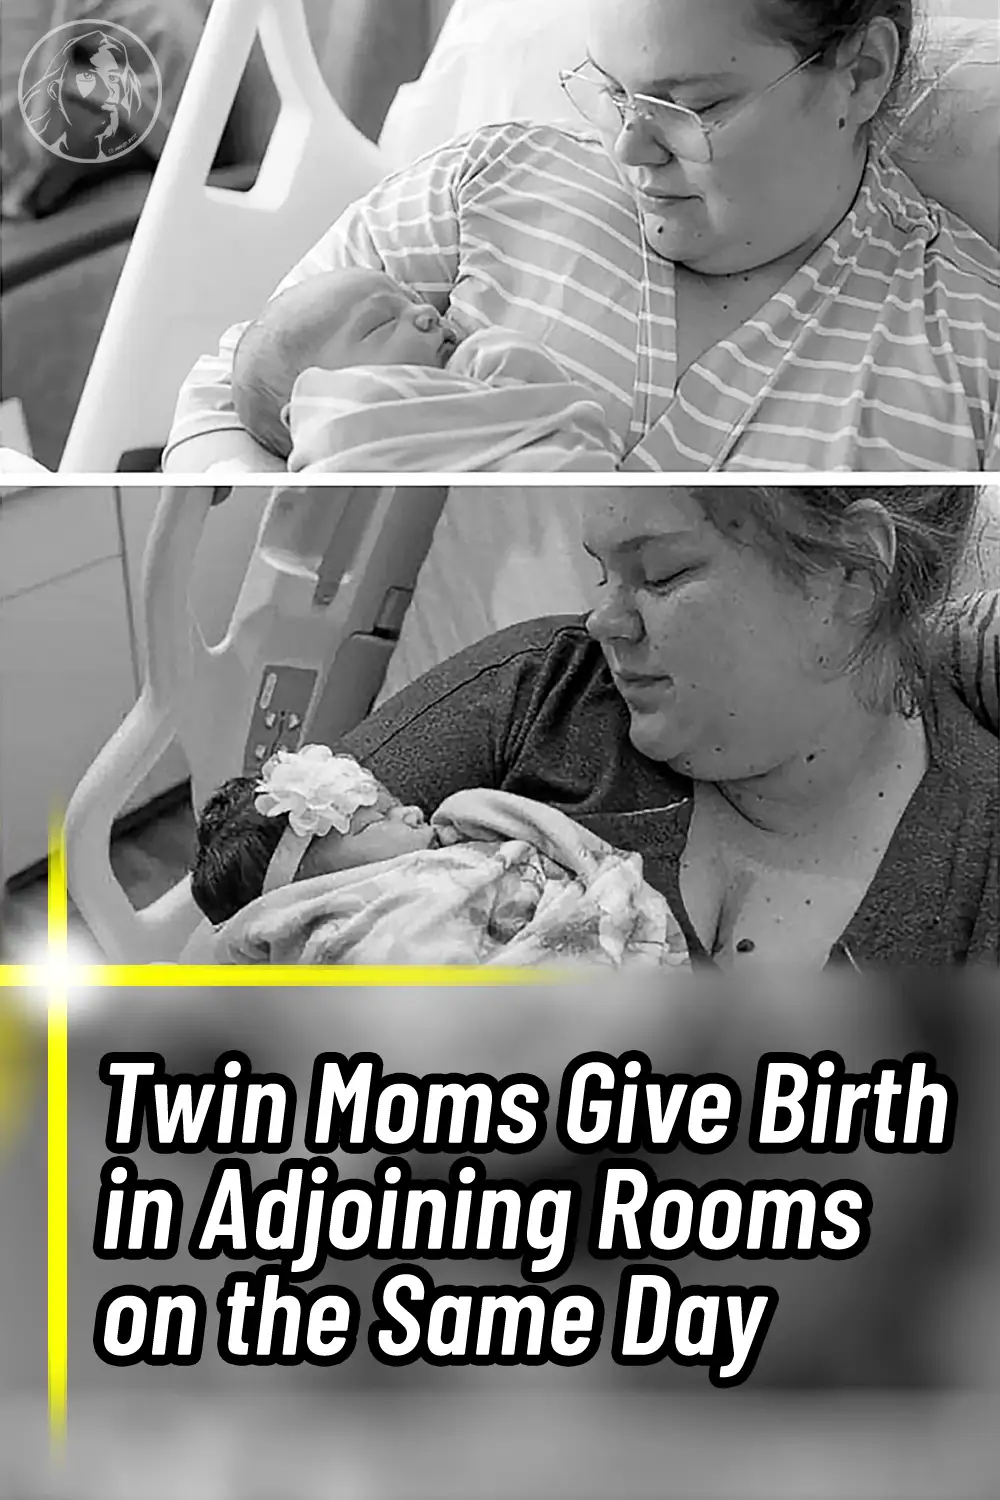 Twin Moms Give Birth in Adjoining Rooms on the Same Day